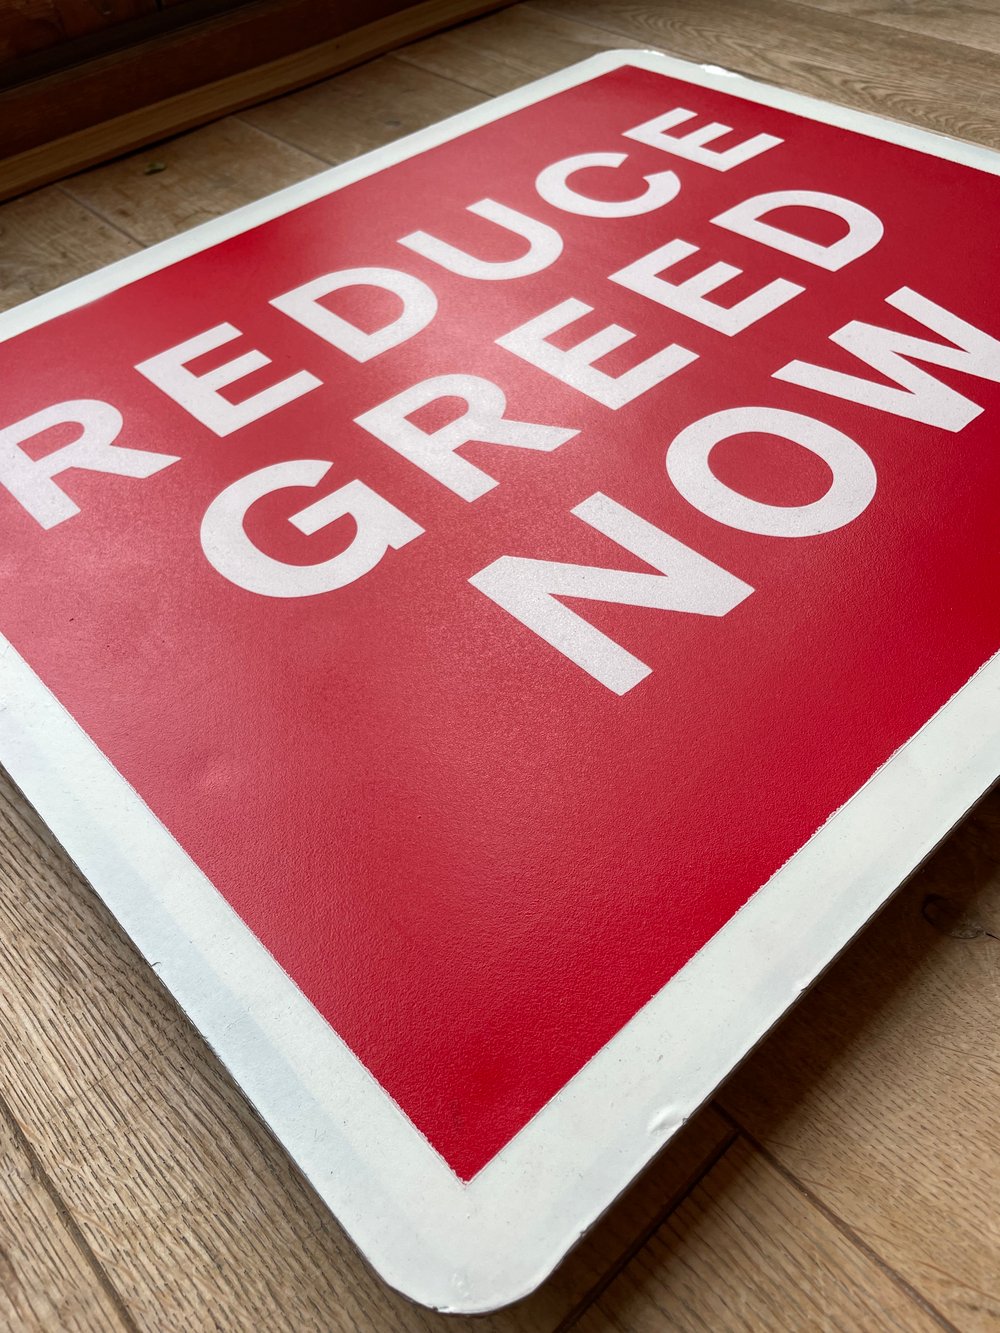 Image of REDUCE GREED NOW METAL ROAD SIGN